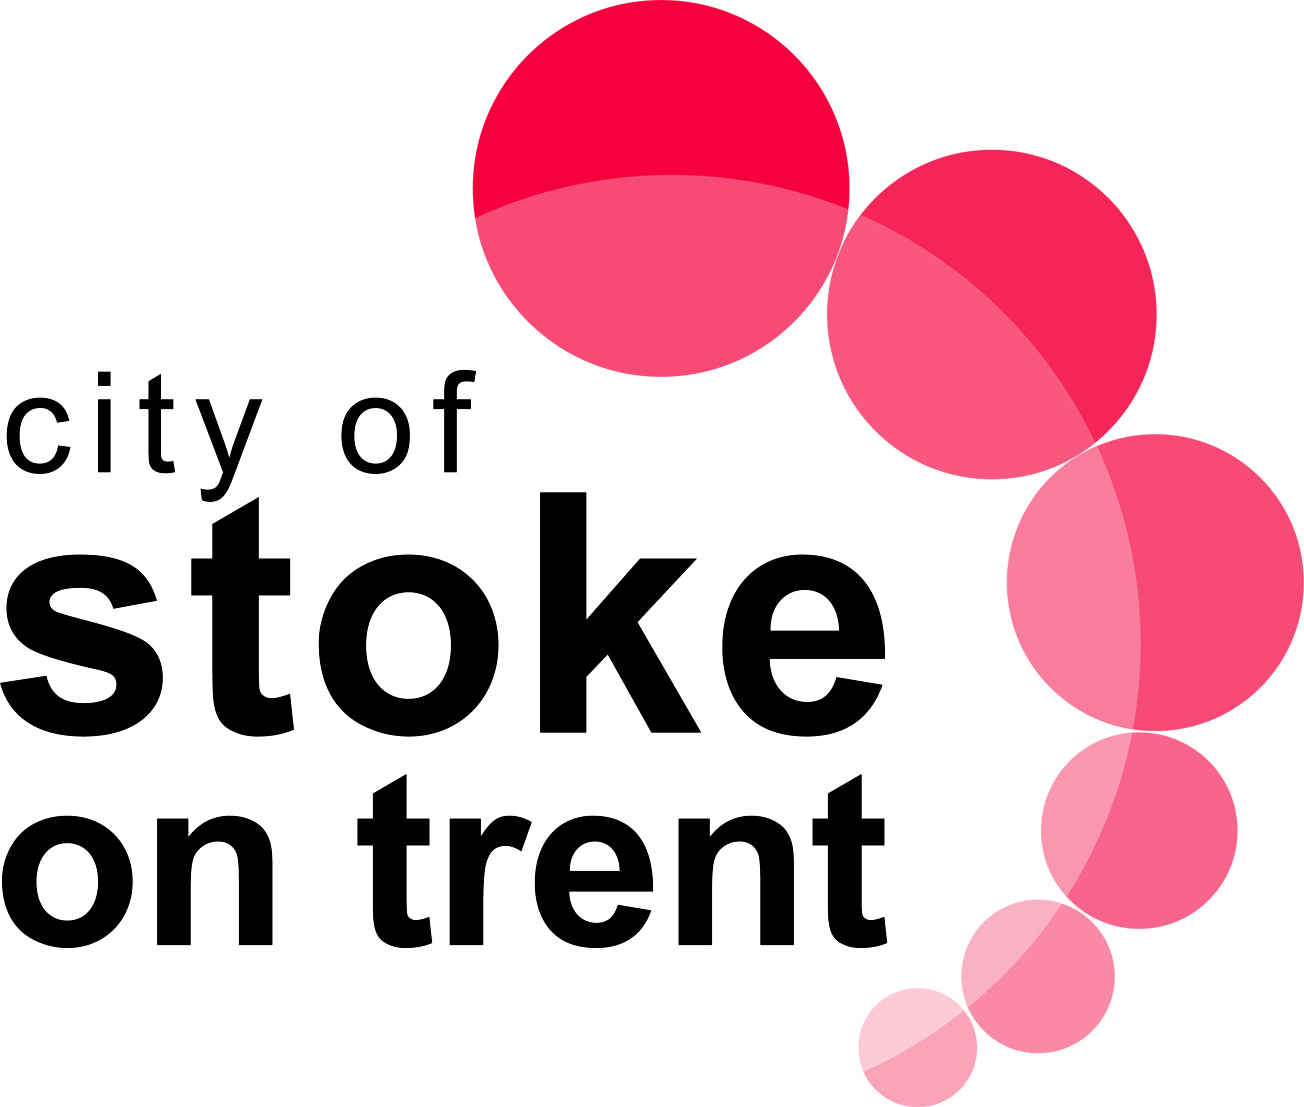 Stoke on Trent City Council